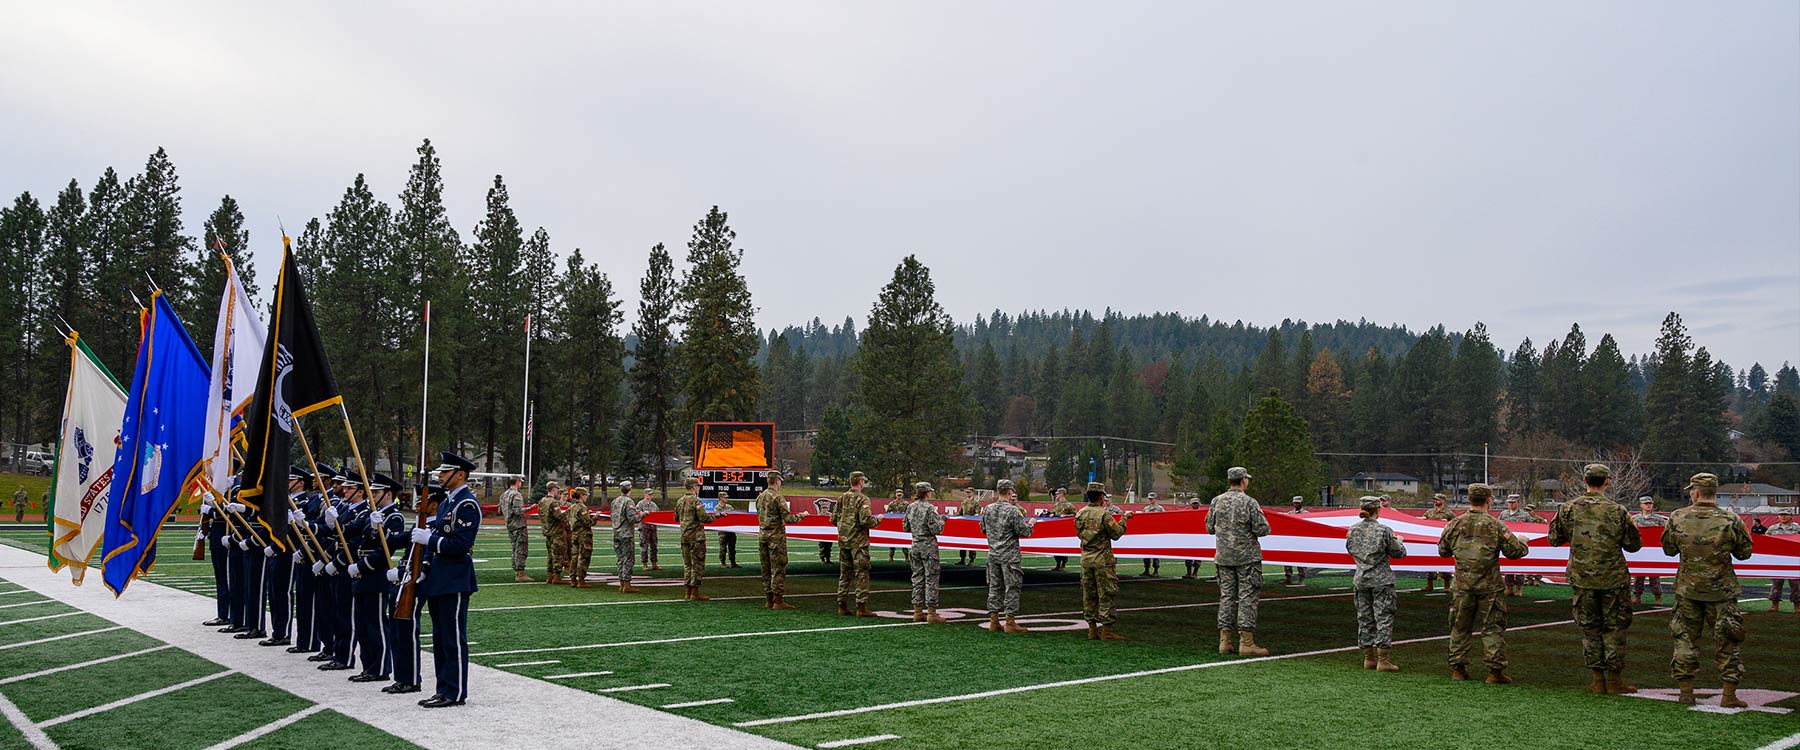 Officers stand with flags on the side of the Whitworth football field, as military members hold a large American flag across the field. 